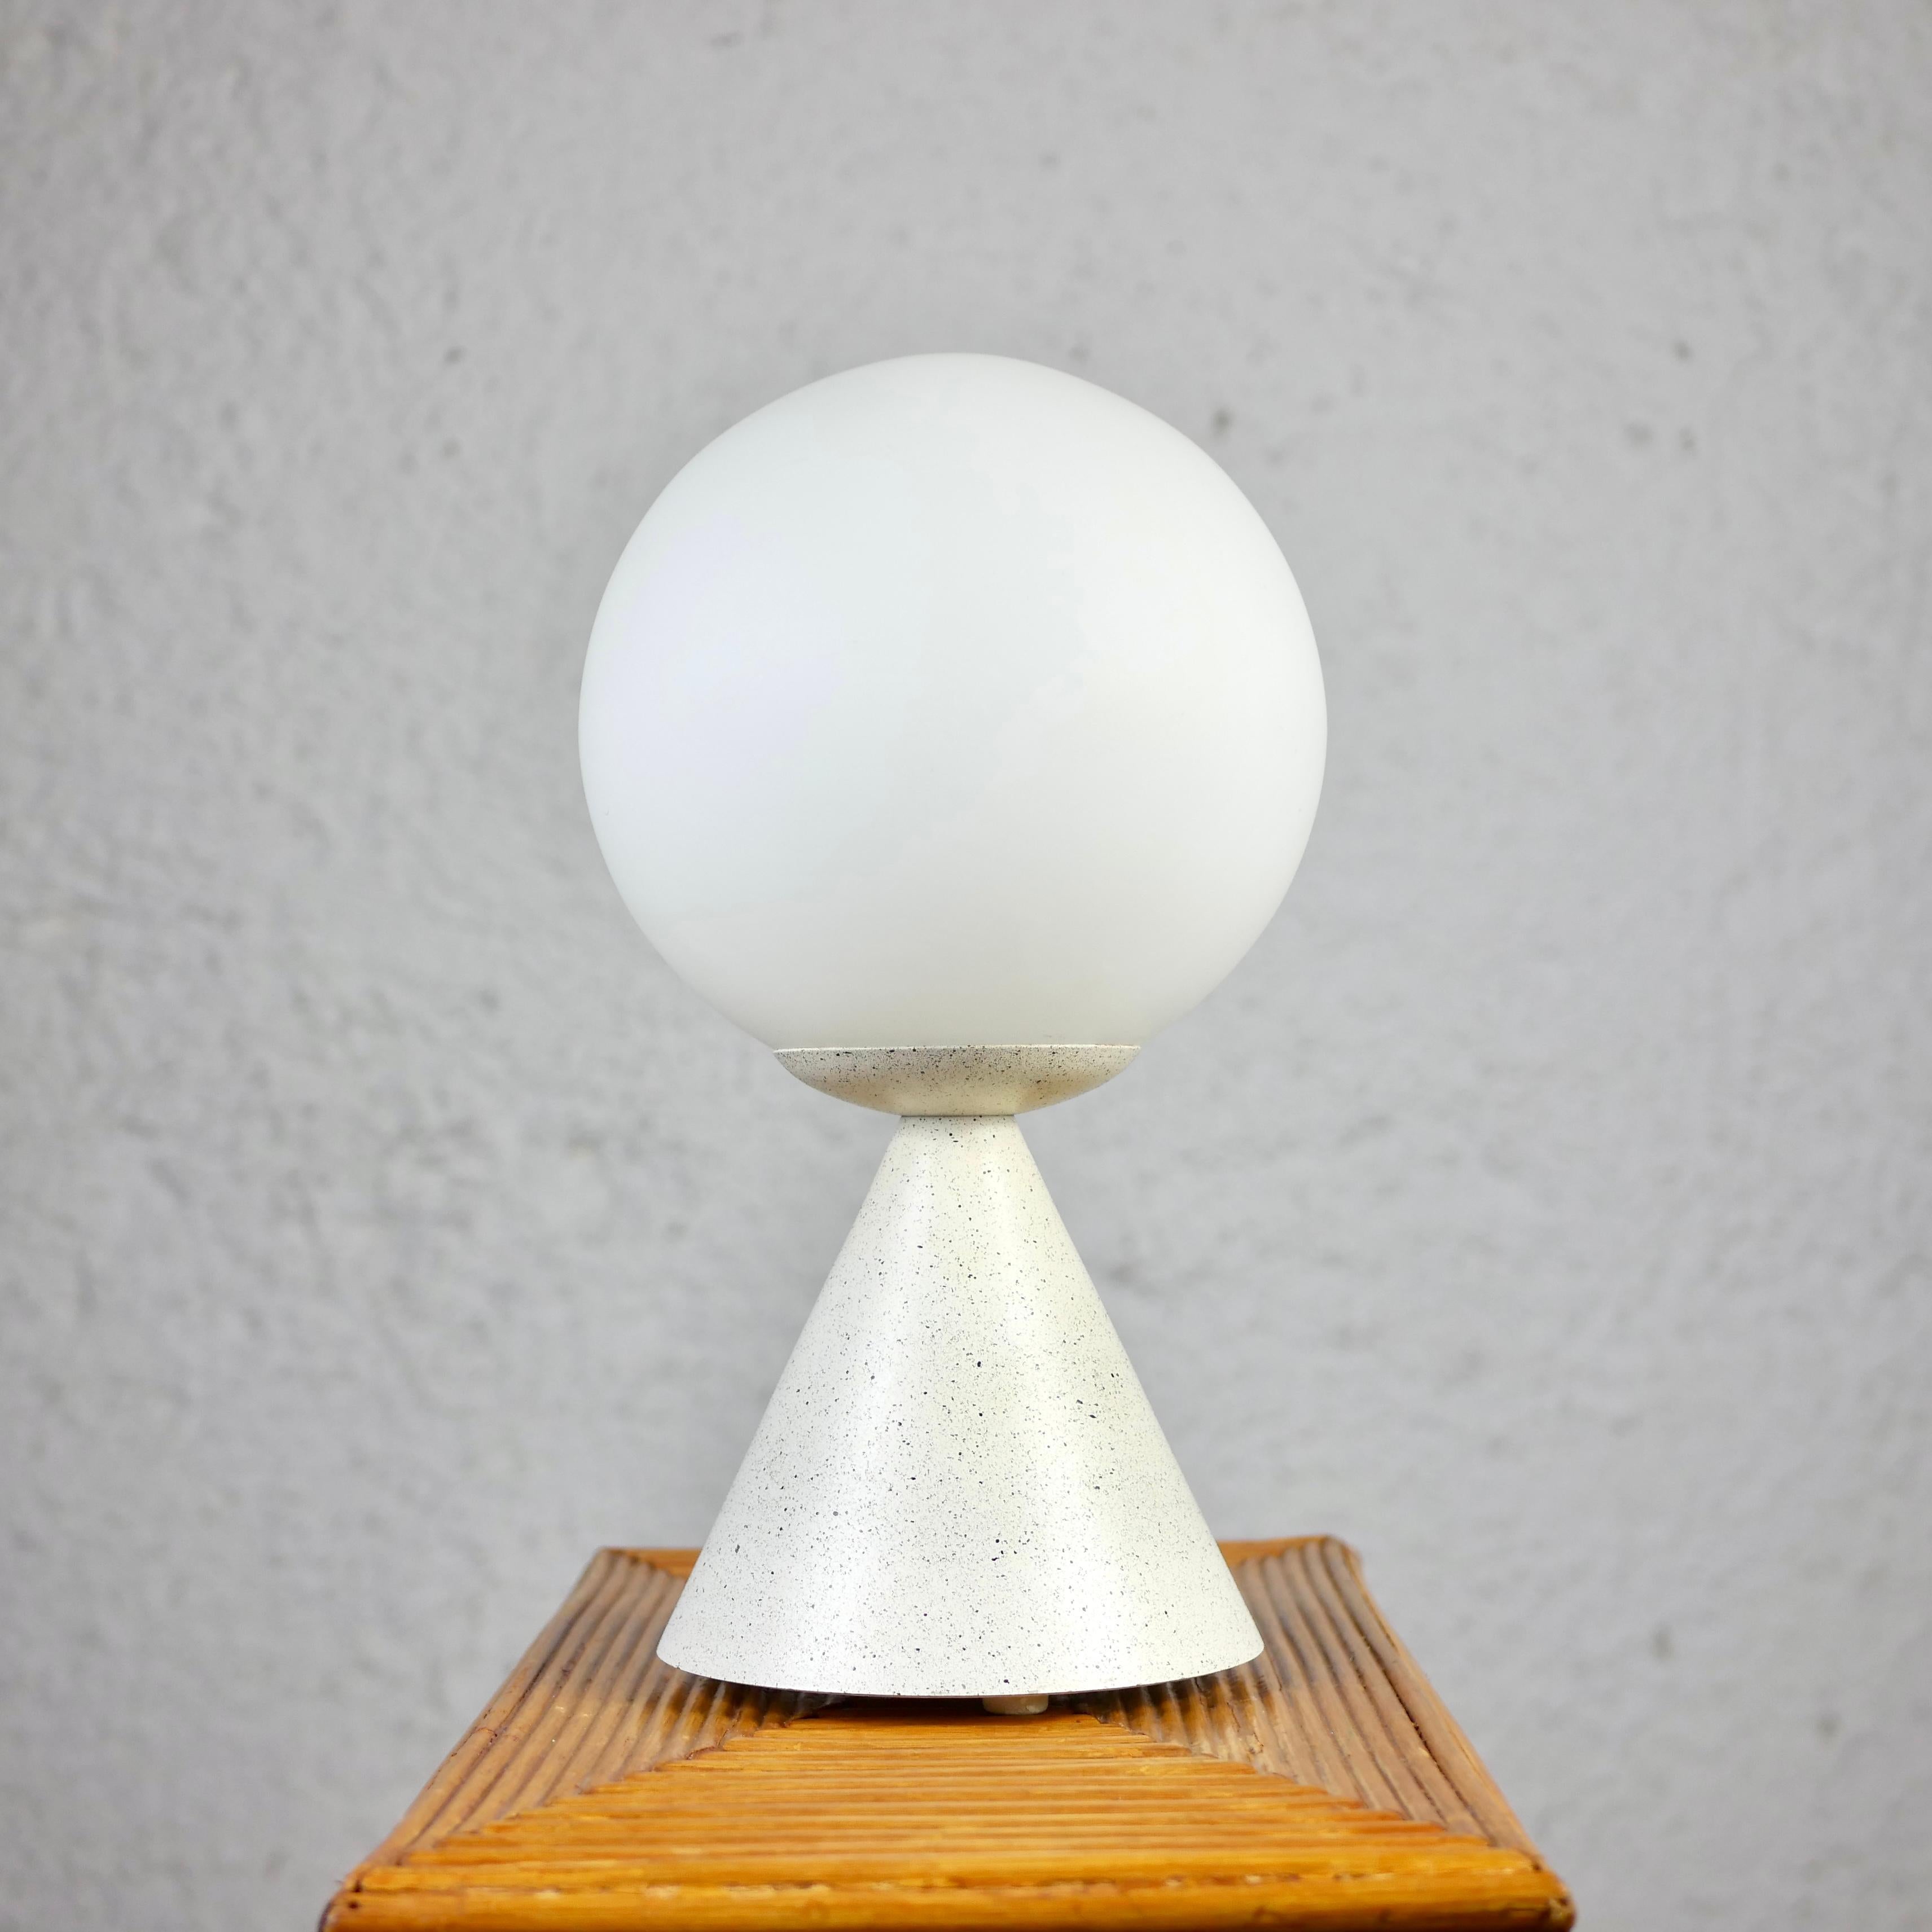 Beautiful and minimalistic table lamp made in France by SCE, in the 1980s.
In the style of the Bilia lamp of Gio Ponti, it has a cream white and black spotted lacquered metal base, and a satin-finished glass sphere. 
Very good condition.
Dimensions